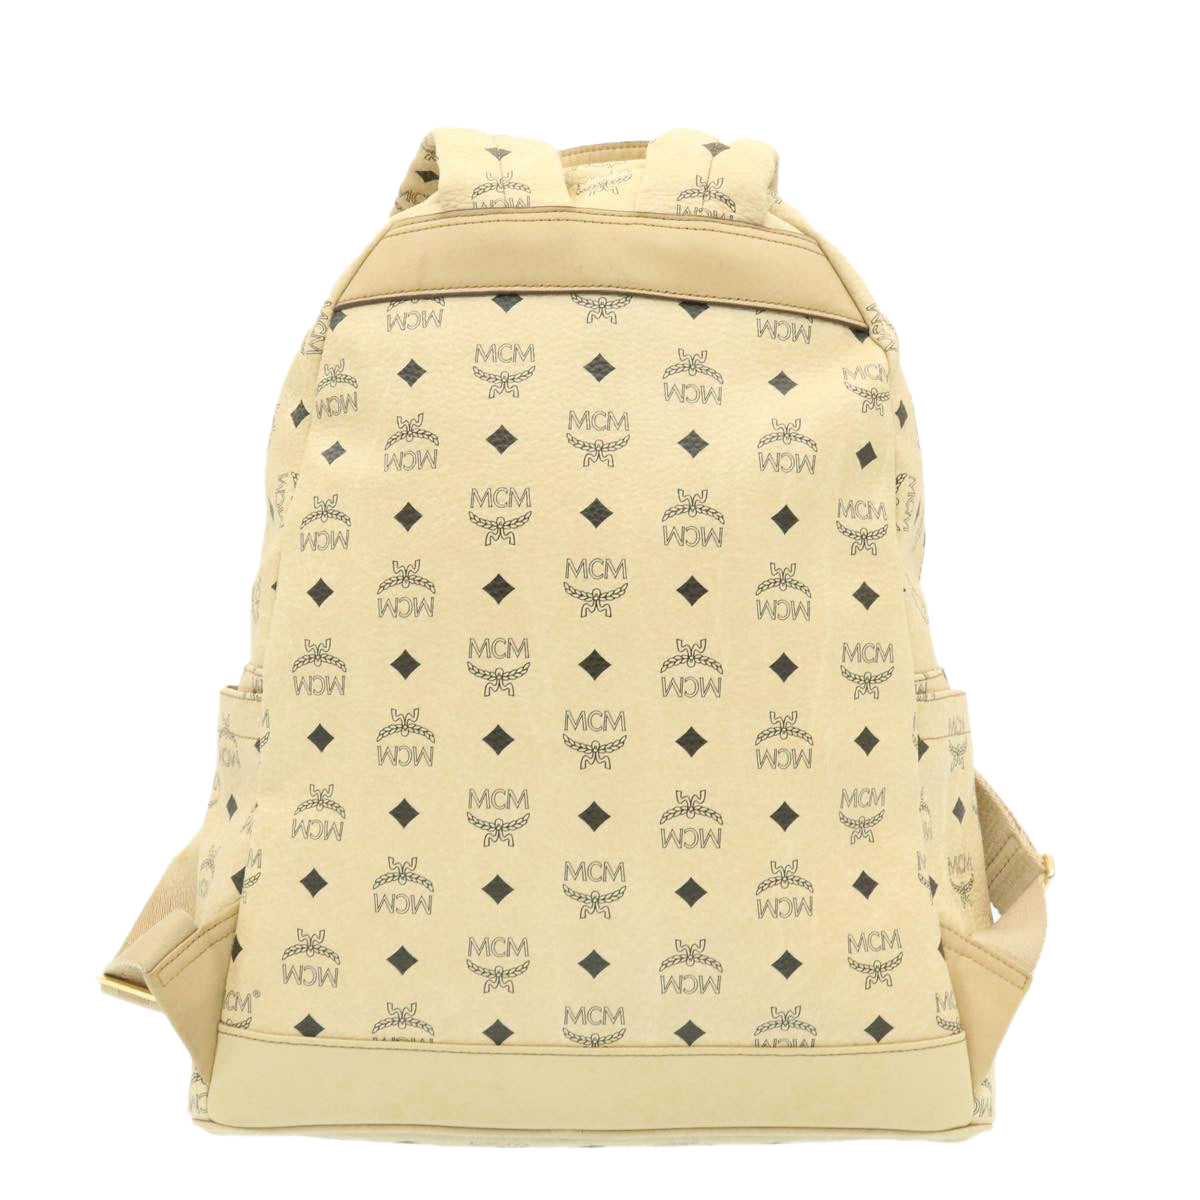 MCM Logogram Studs Backpack PVC Leather Beige Auth am1447g - 0